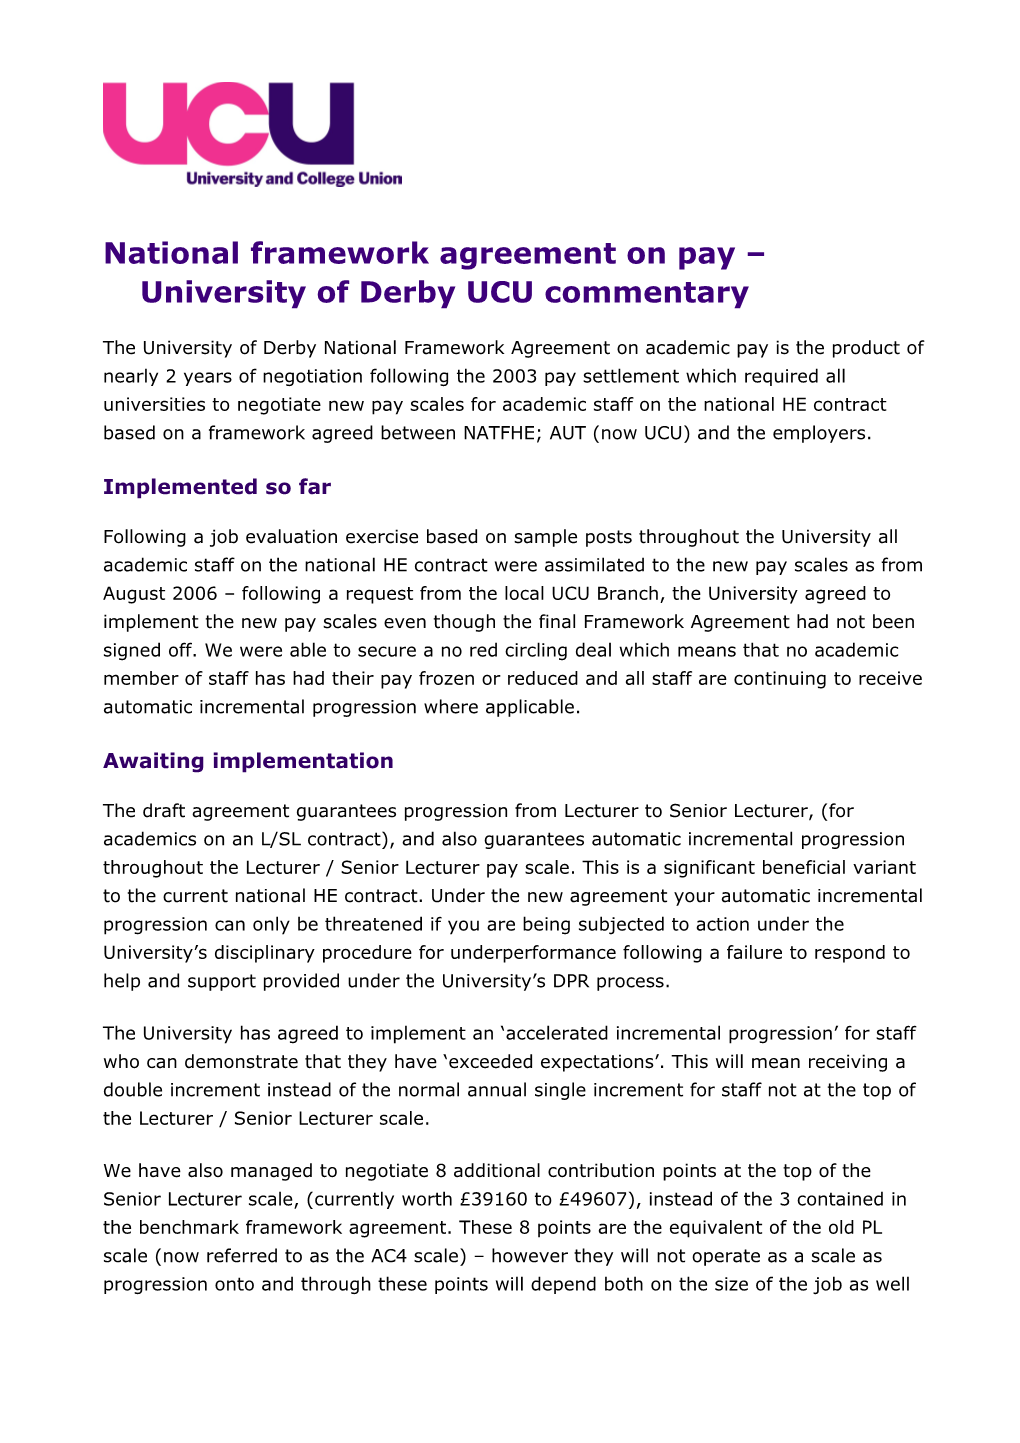 National Framework Agreement on Pay Universityof Derby UCU Commentary